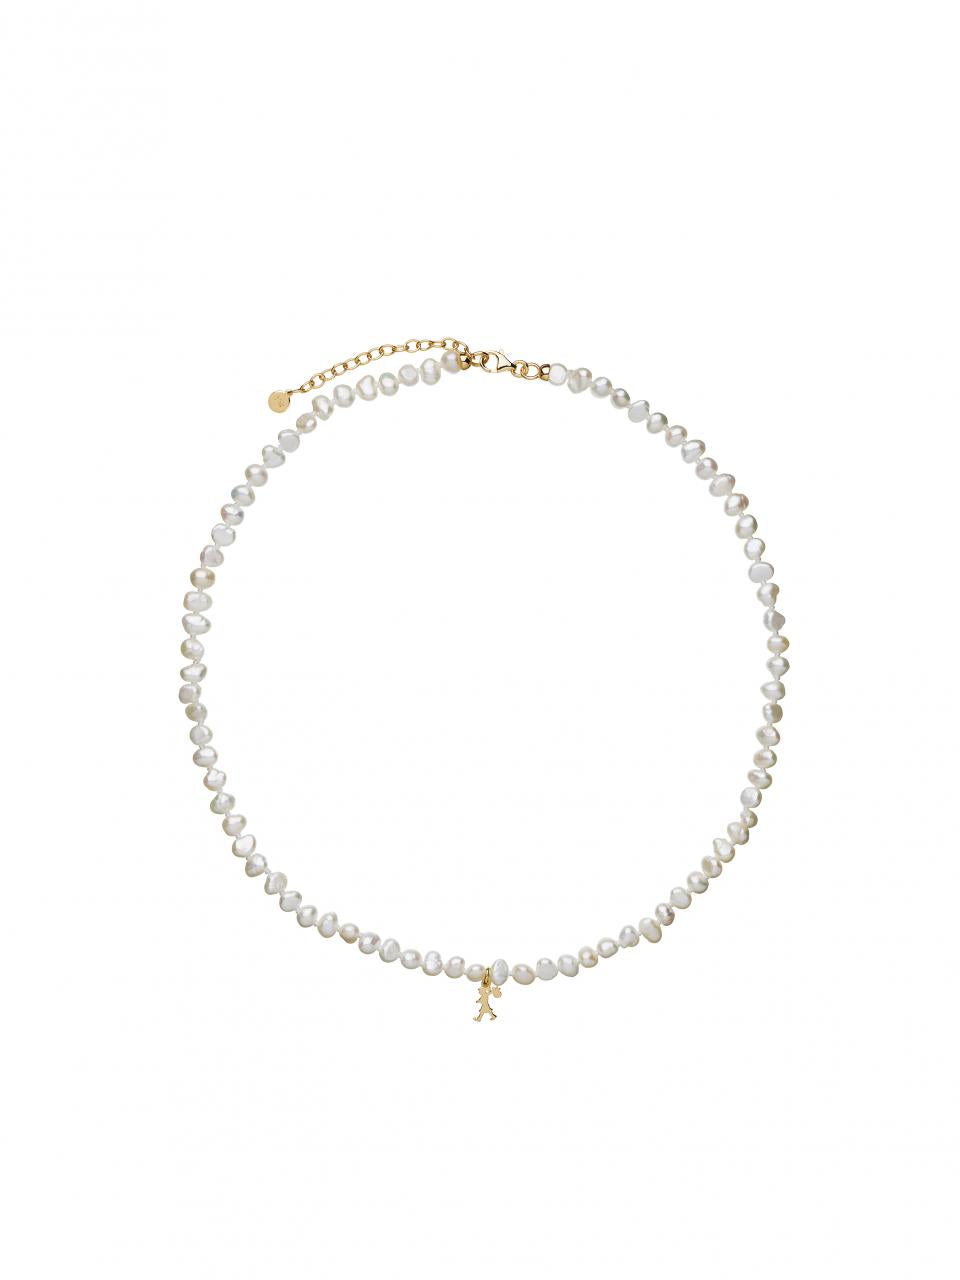 Karen Walker Mini Girl With Pearls Necklace Sterling Silver Gold Plated